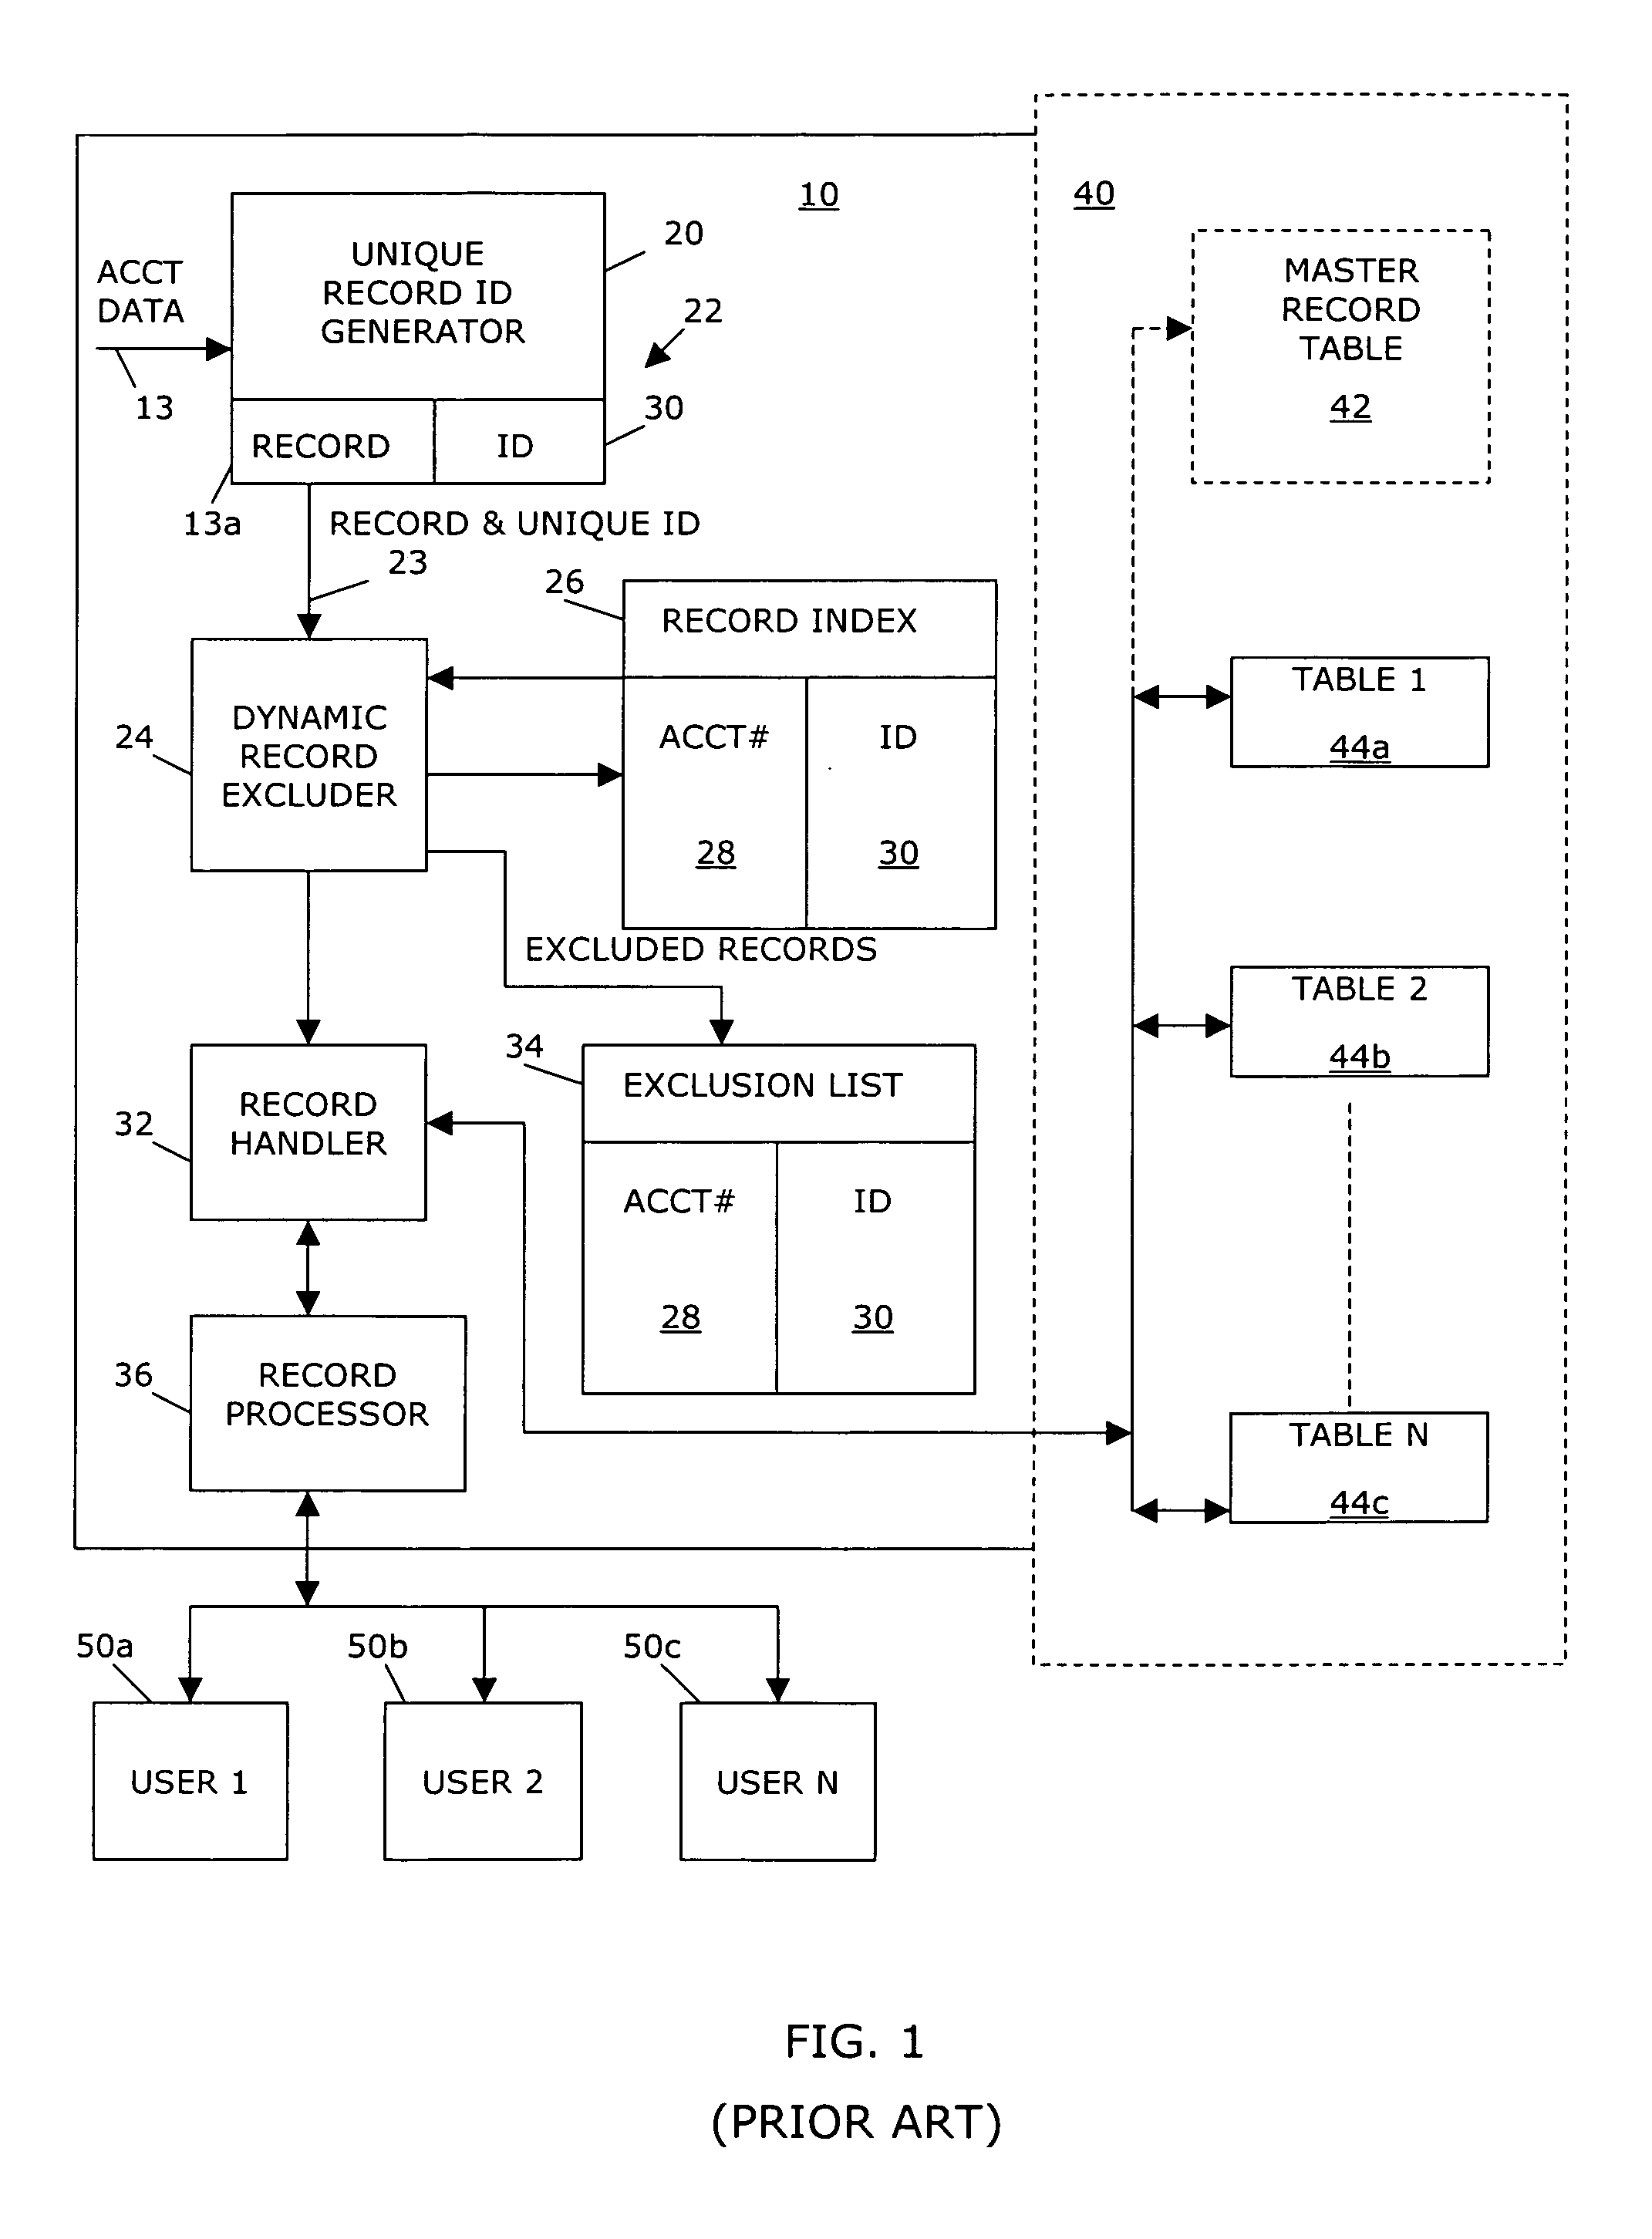 System and method of propagating exclusion records in a networked computer telephony integration system